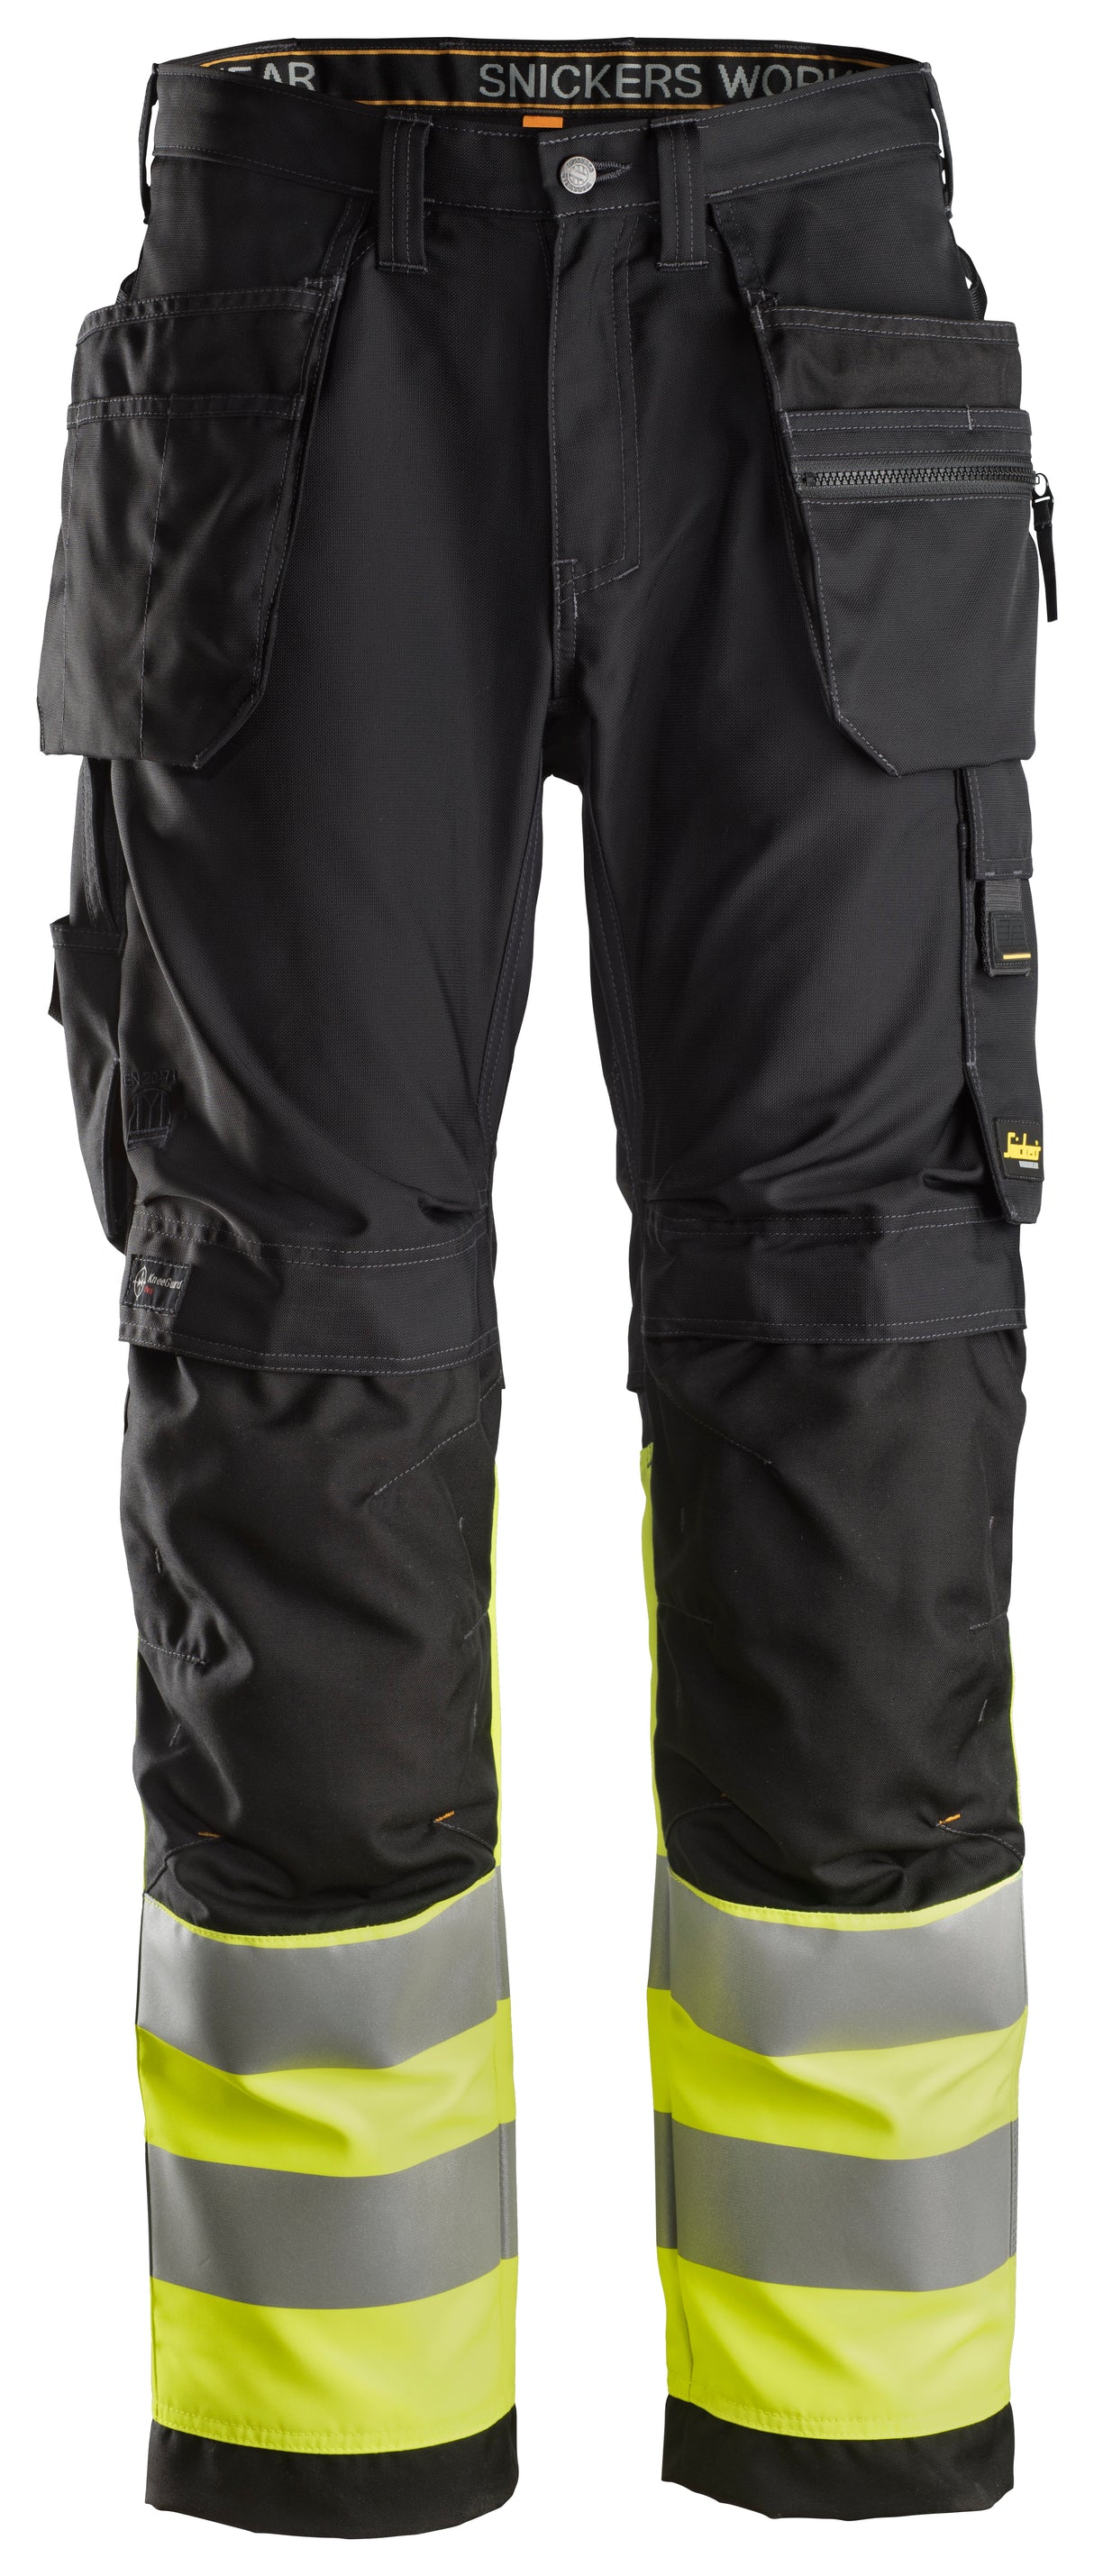 Snickers 6233 Allroundwork Hi-vis Trousers Holster pocket Class 1 Black\Hi-vis Yellow